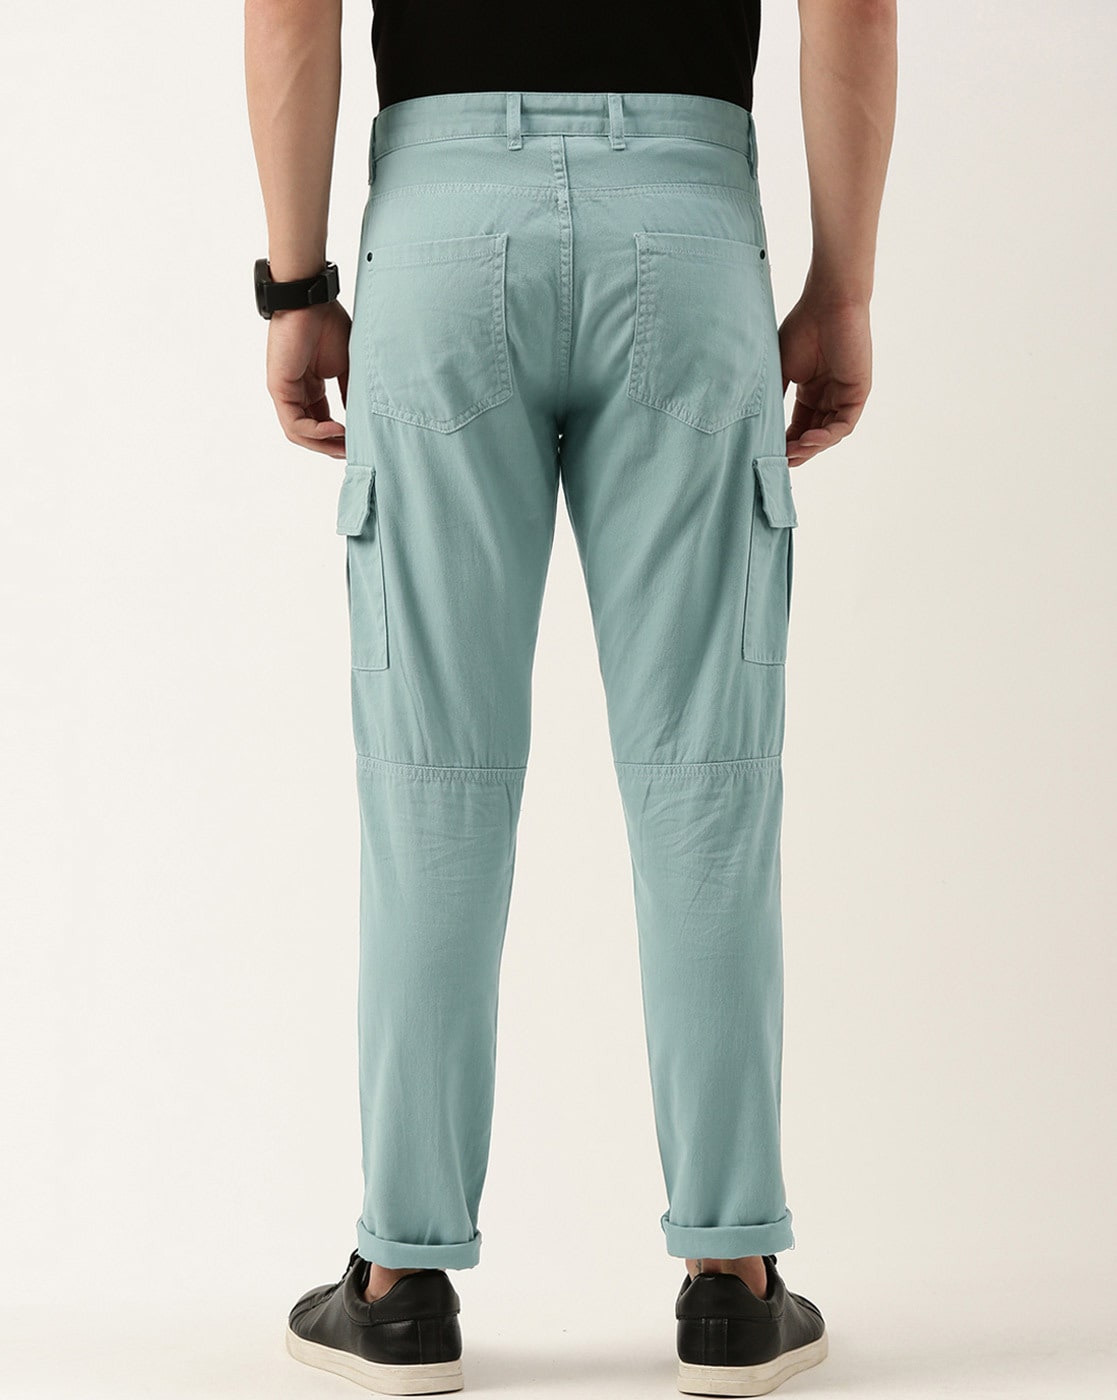 Buy Blue Trousers & Pants for Men by iVOC Online